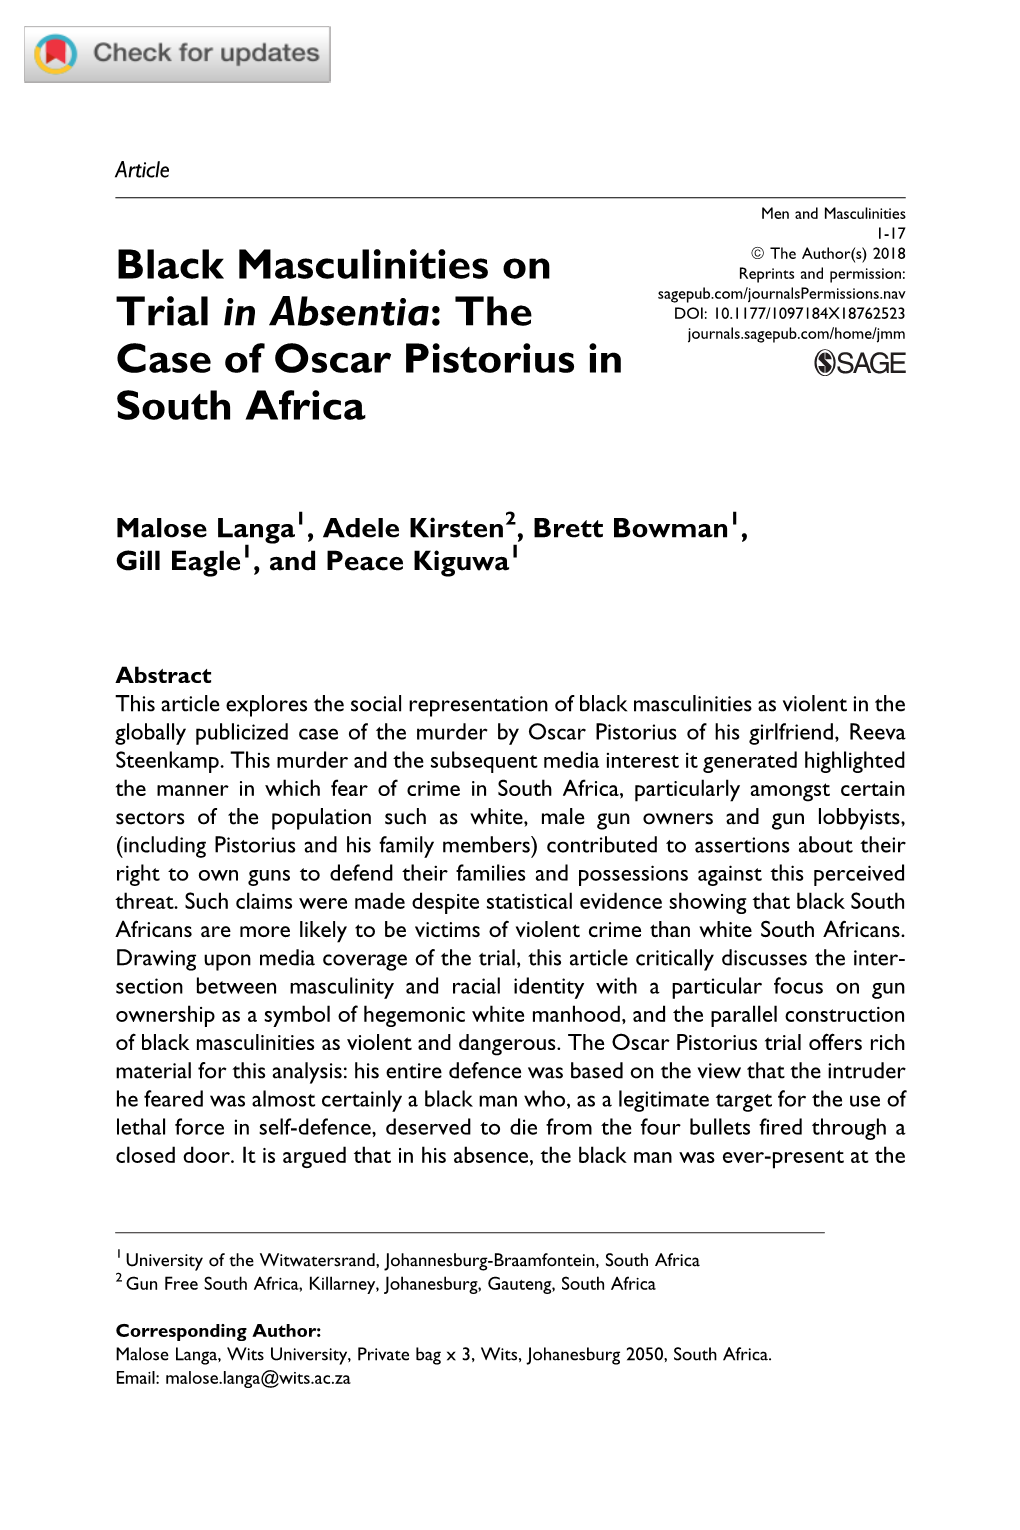 Black Masculinities on Trial in Absentia